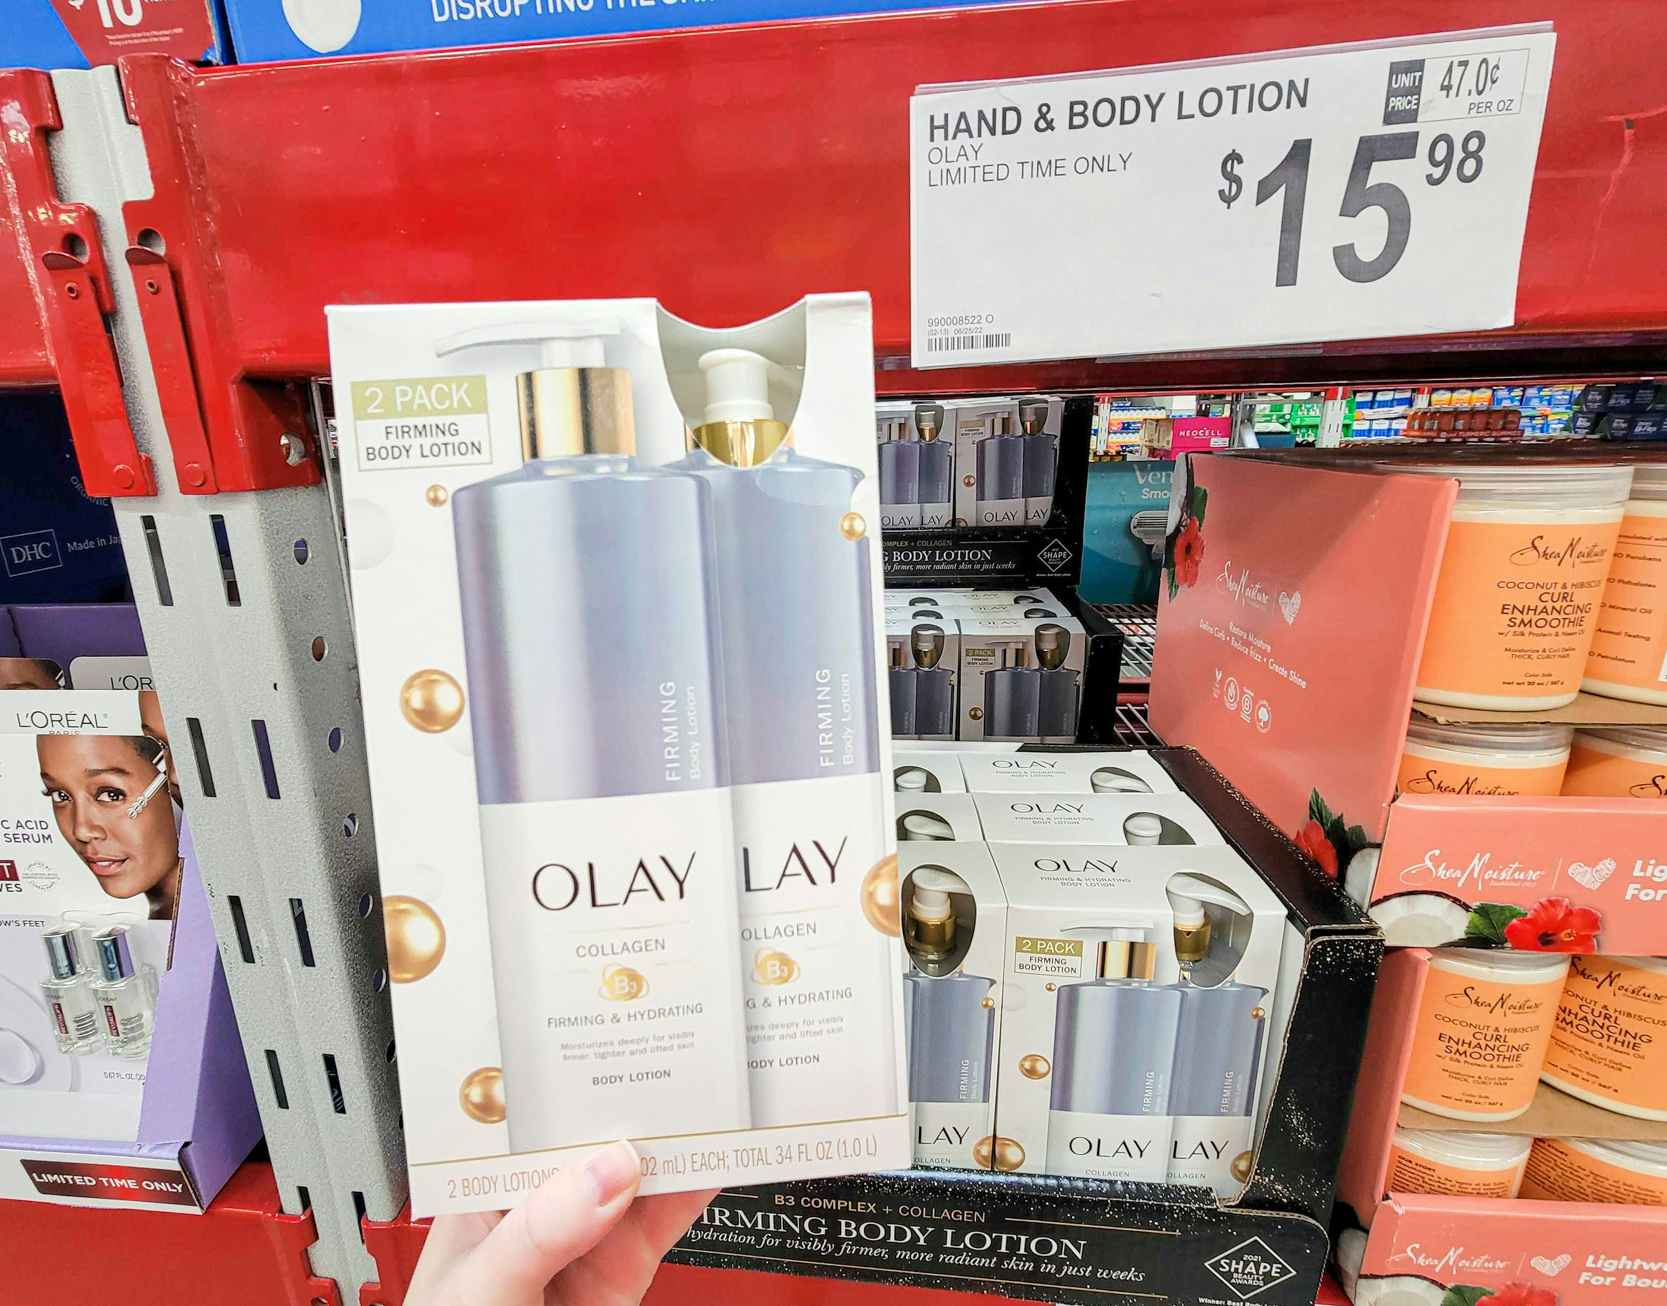 hand holding a 2-pack of olay firming body lotion